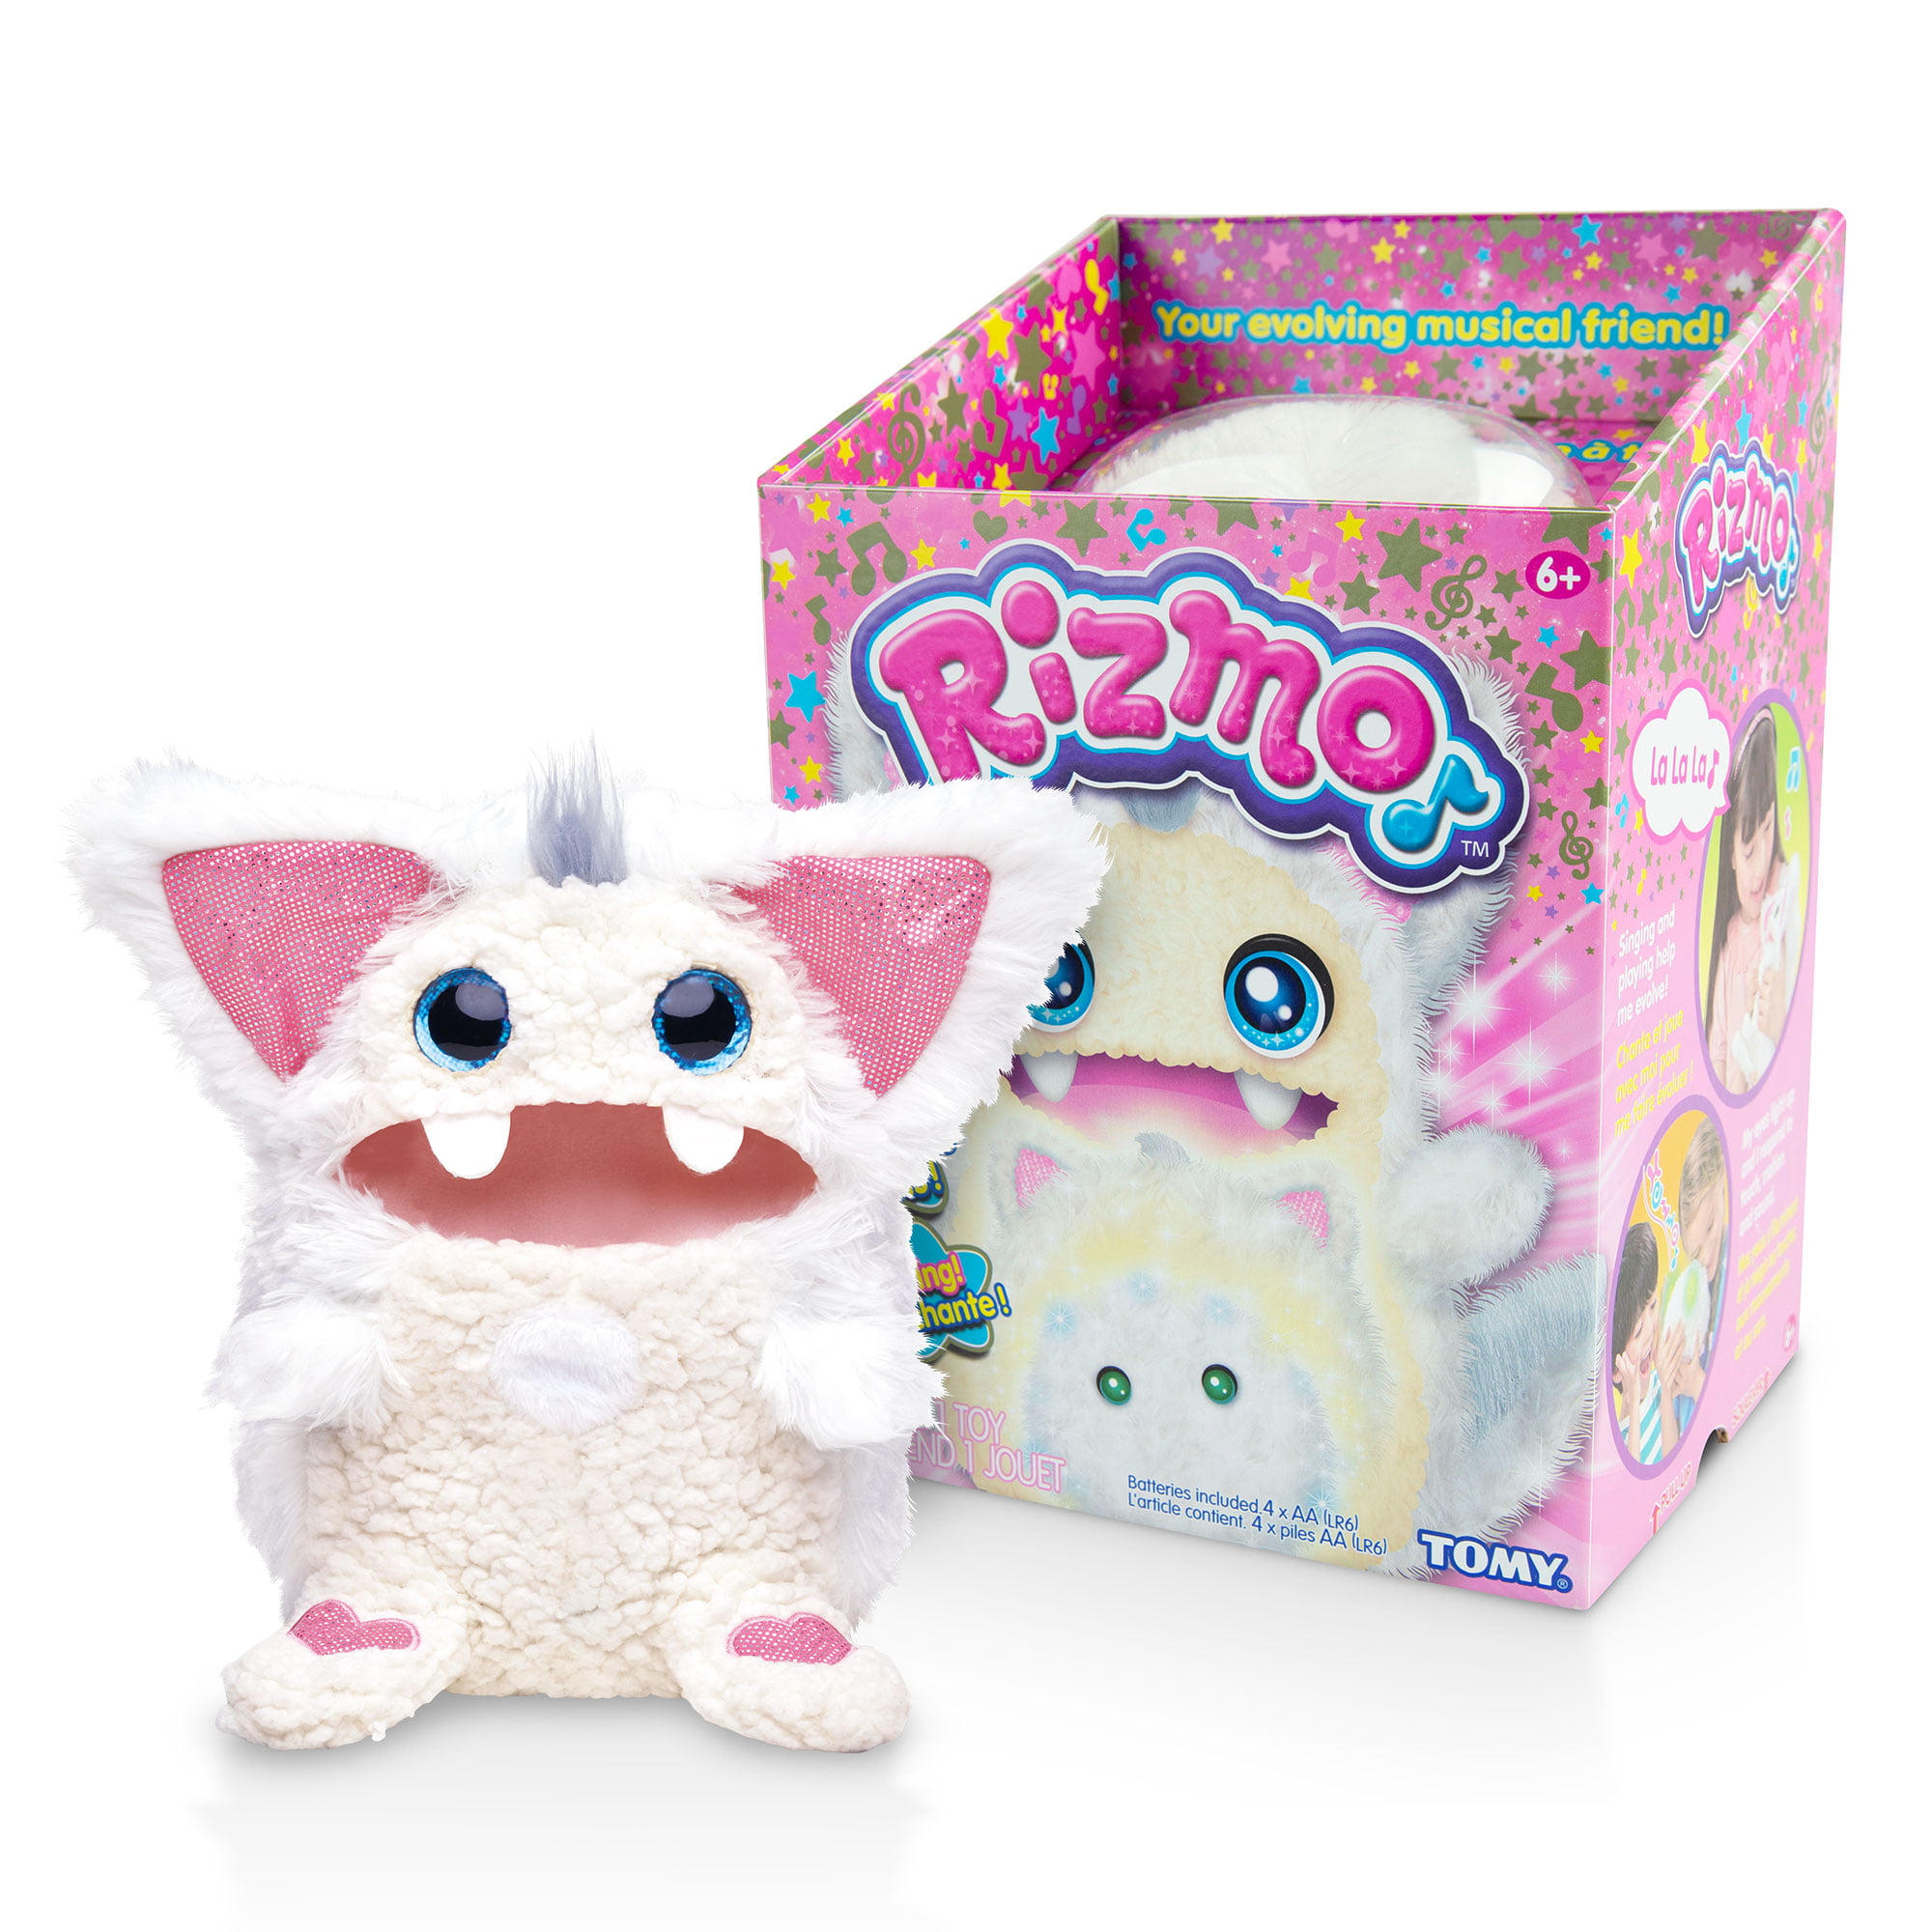 Berry New Pink Rizmo Evolving Musical Friend Interactive Plush Toy 